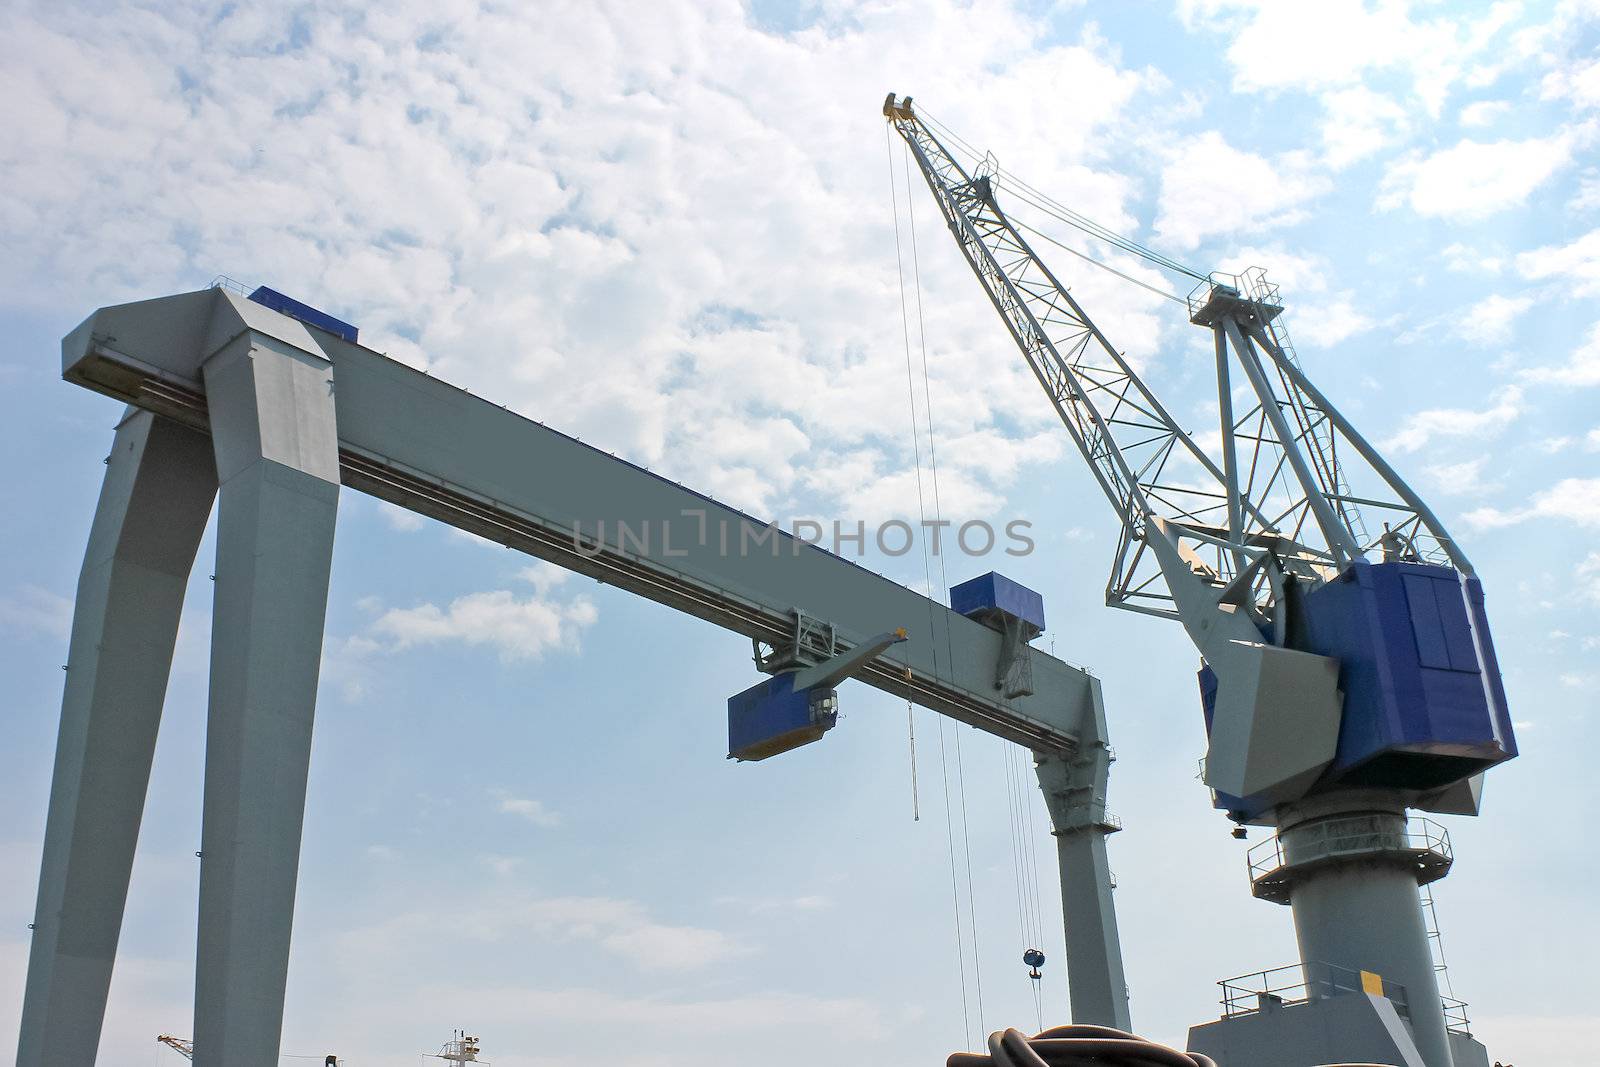 Gantry crane for unloading at the port by NickNick